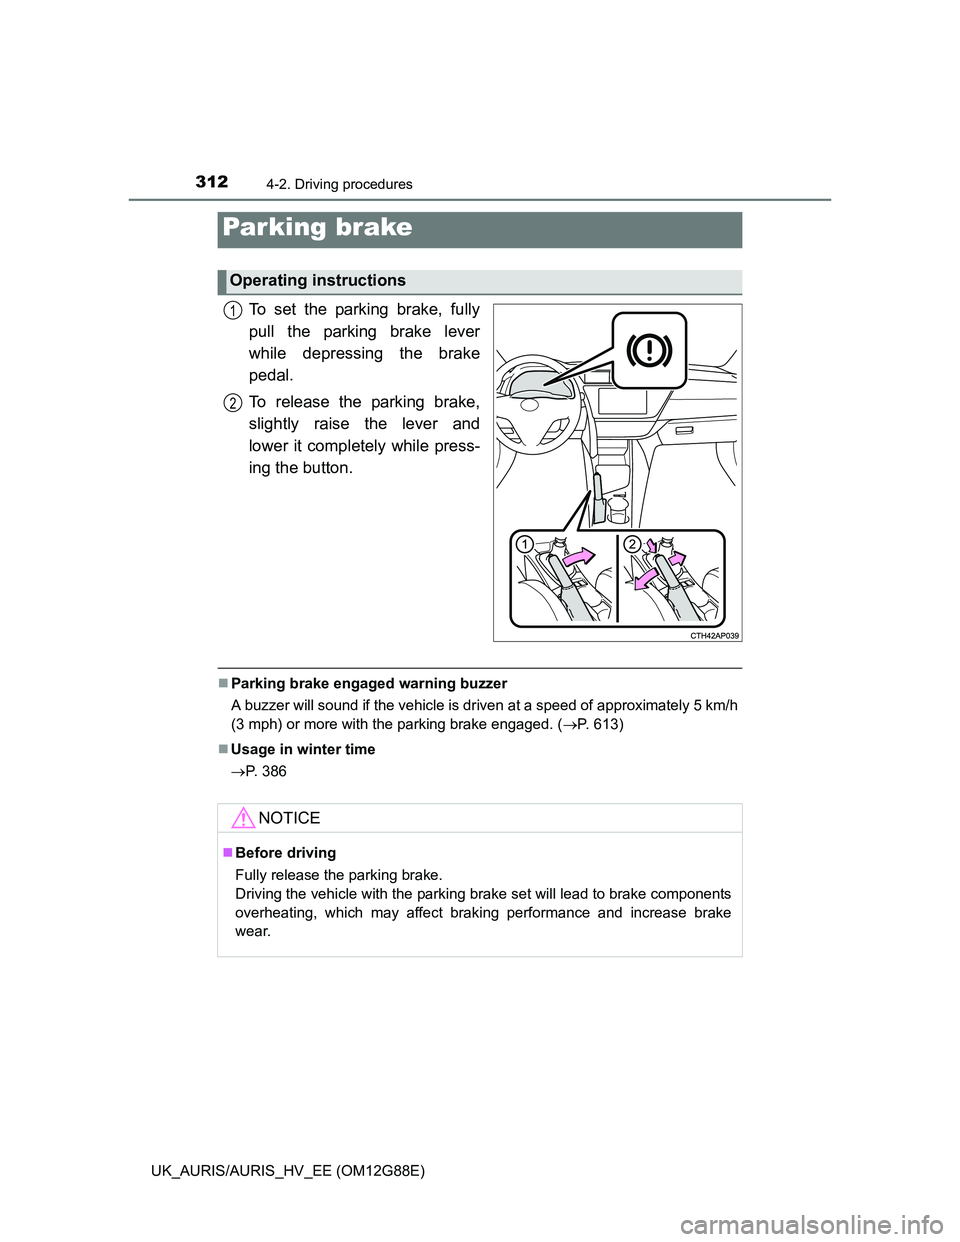 TOYOTA AURIS HYBRID 2014  Owners Manual 3124-2. Driving procedures
UK_AURIS/AURIS_HV_EE (OM12G88E)
To set the parking brake, fully
pull the parking brake lever
while depressing the brake
pedal.
To release the parking brake,
slightly raise t